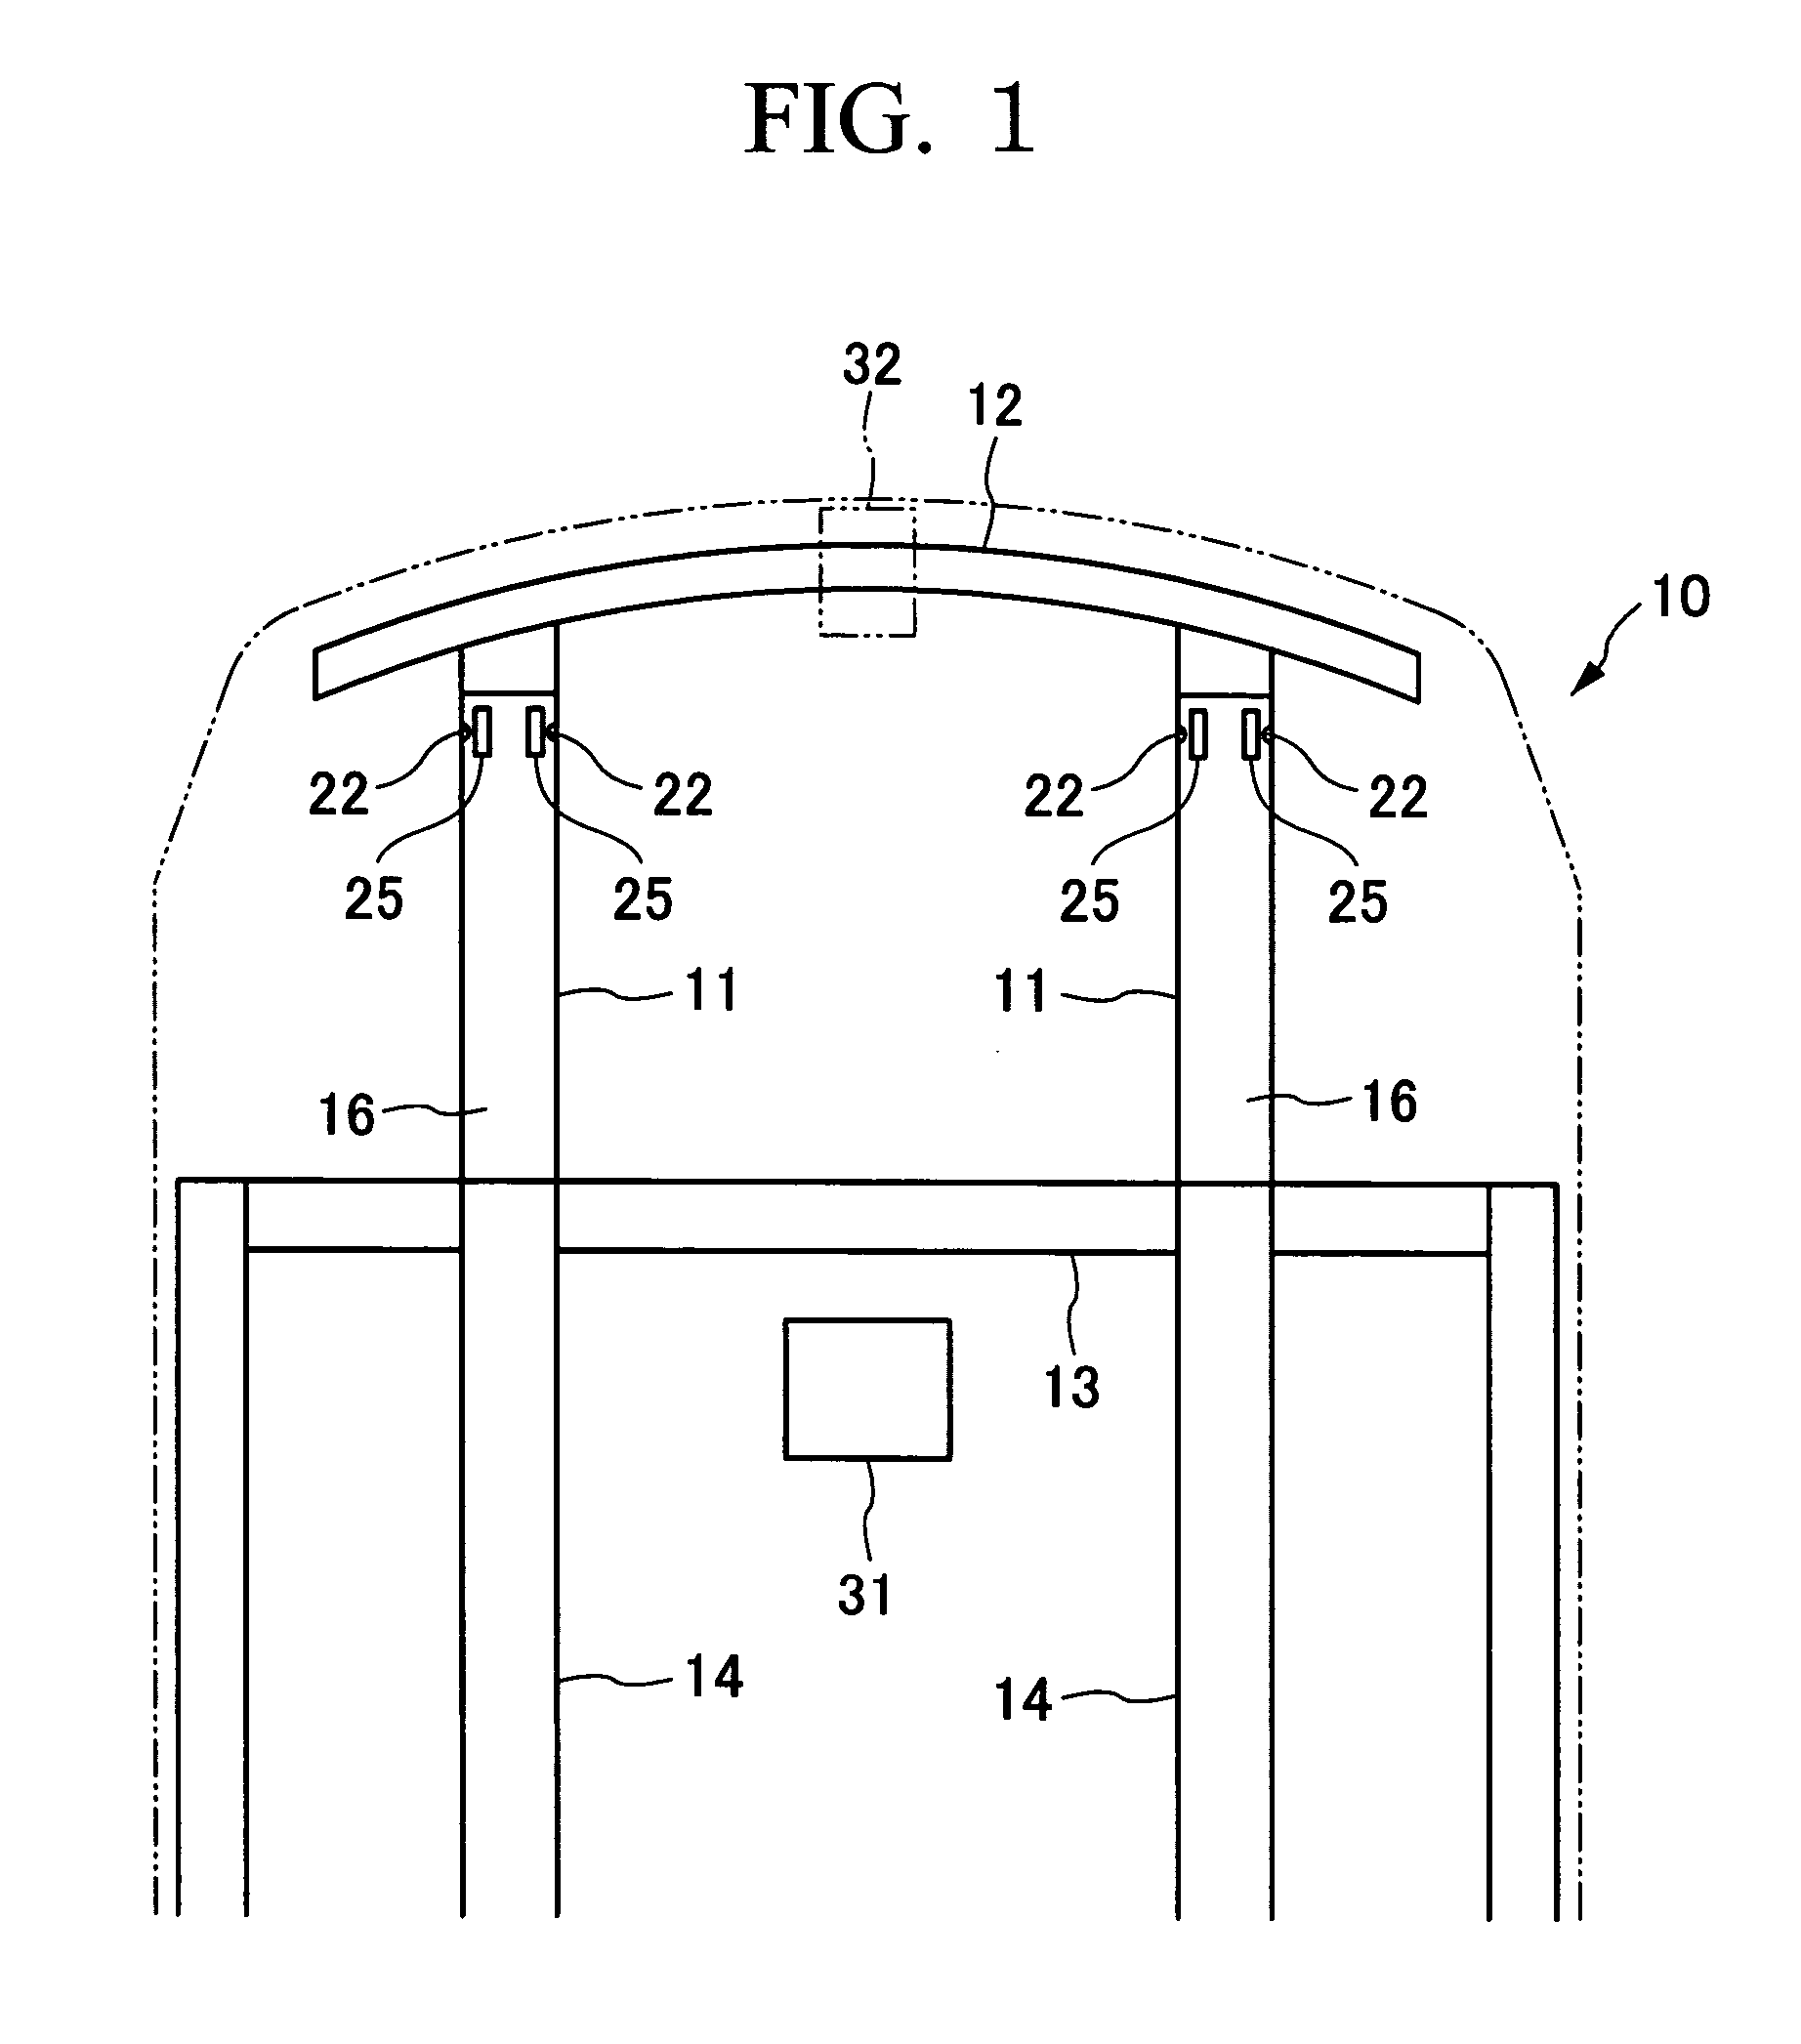 Chassis frame buckling control device and chassis frame deformation control device